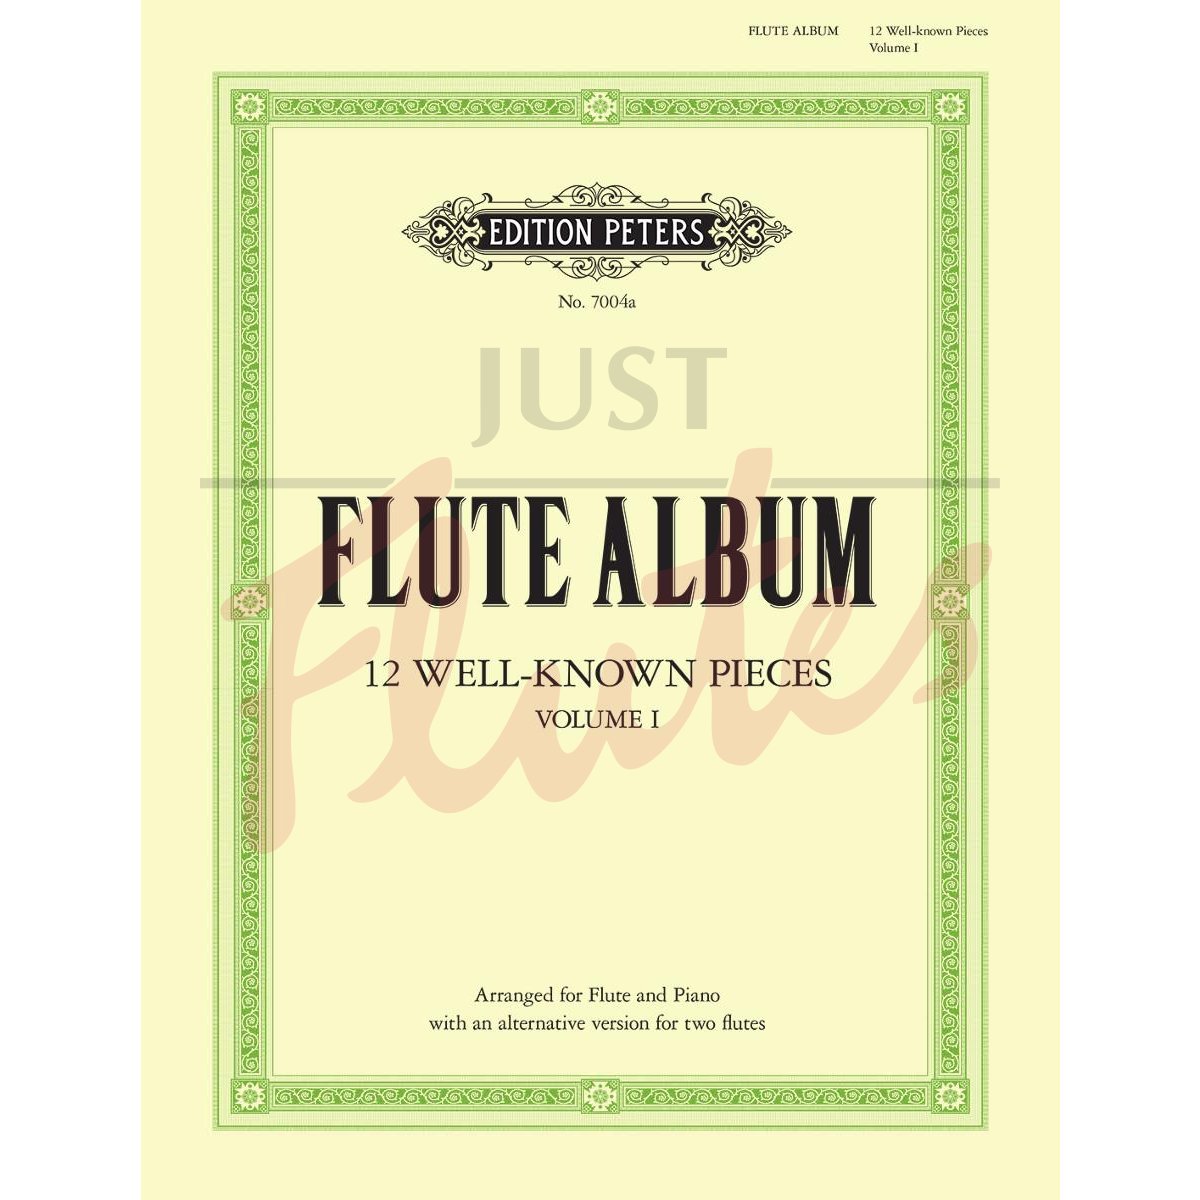 Flute Album Vol 1 for Flute and Piano, or Two Flutes